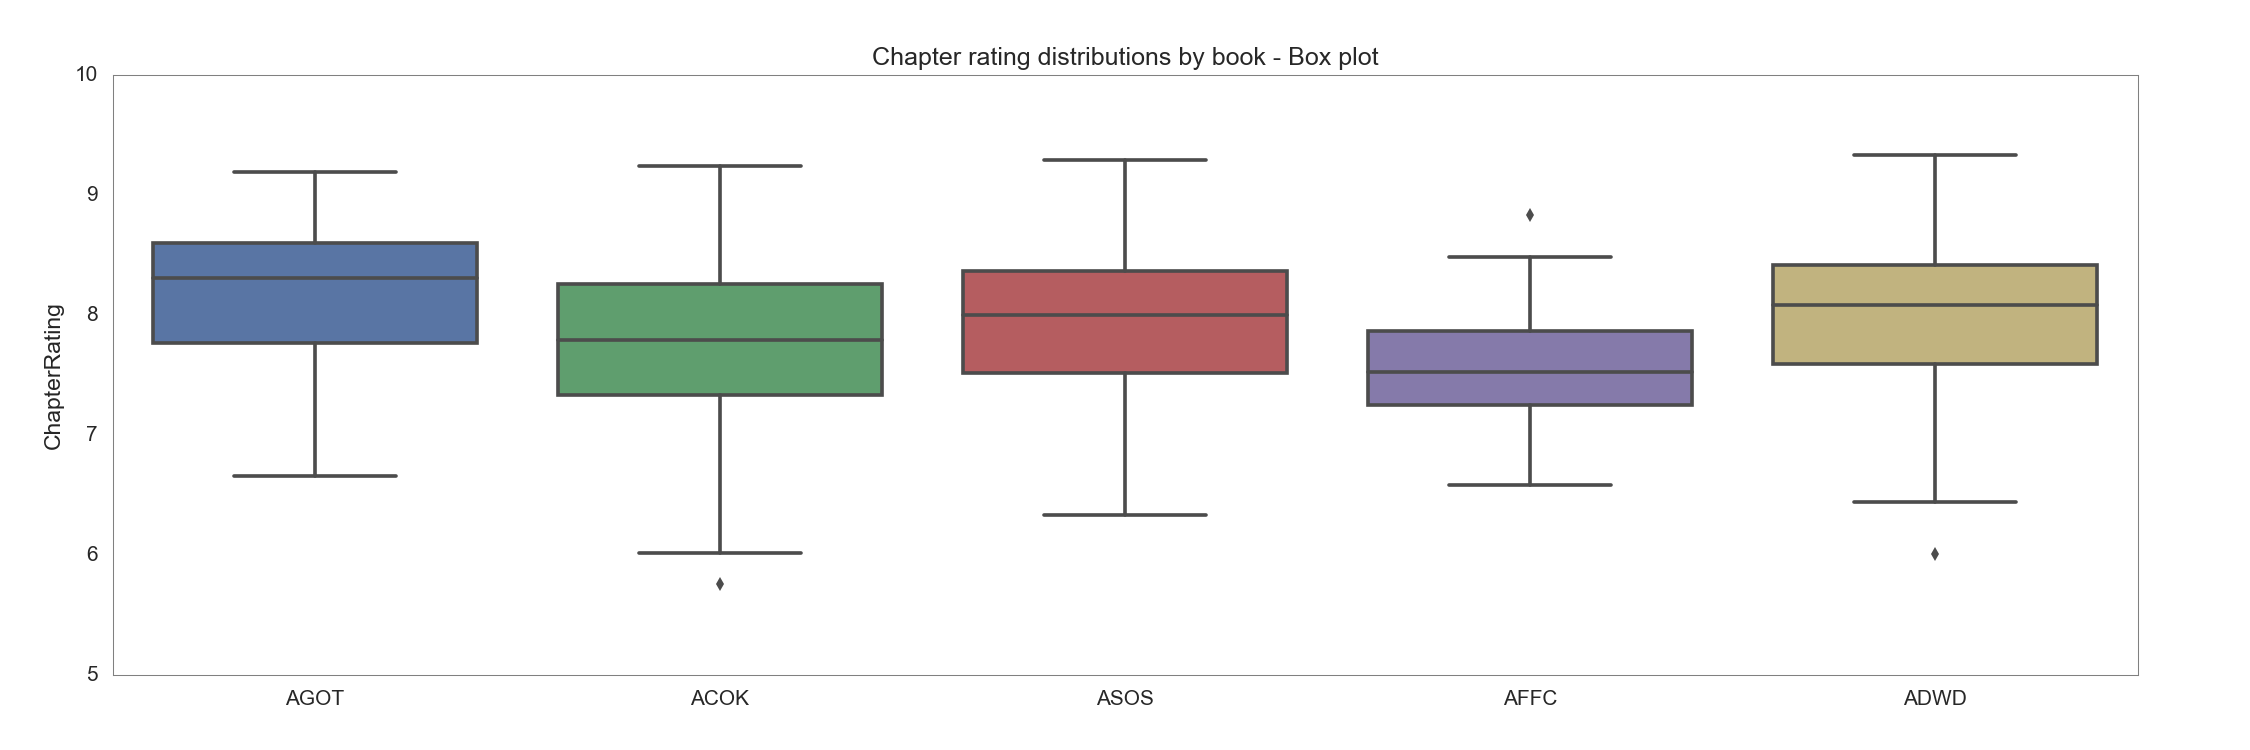 Chapter ratings distribution by book - box